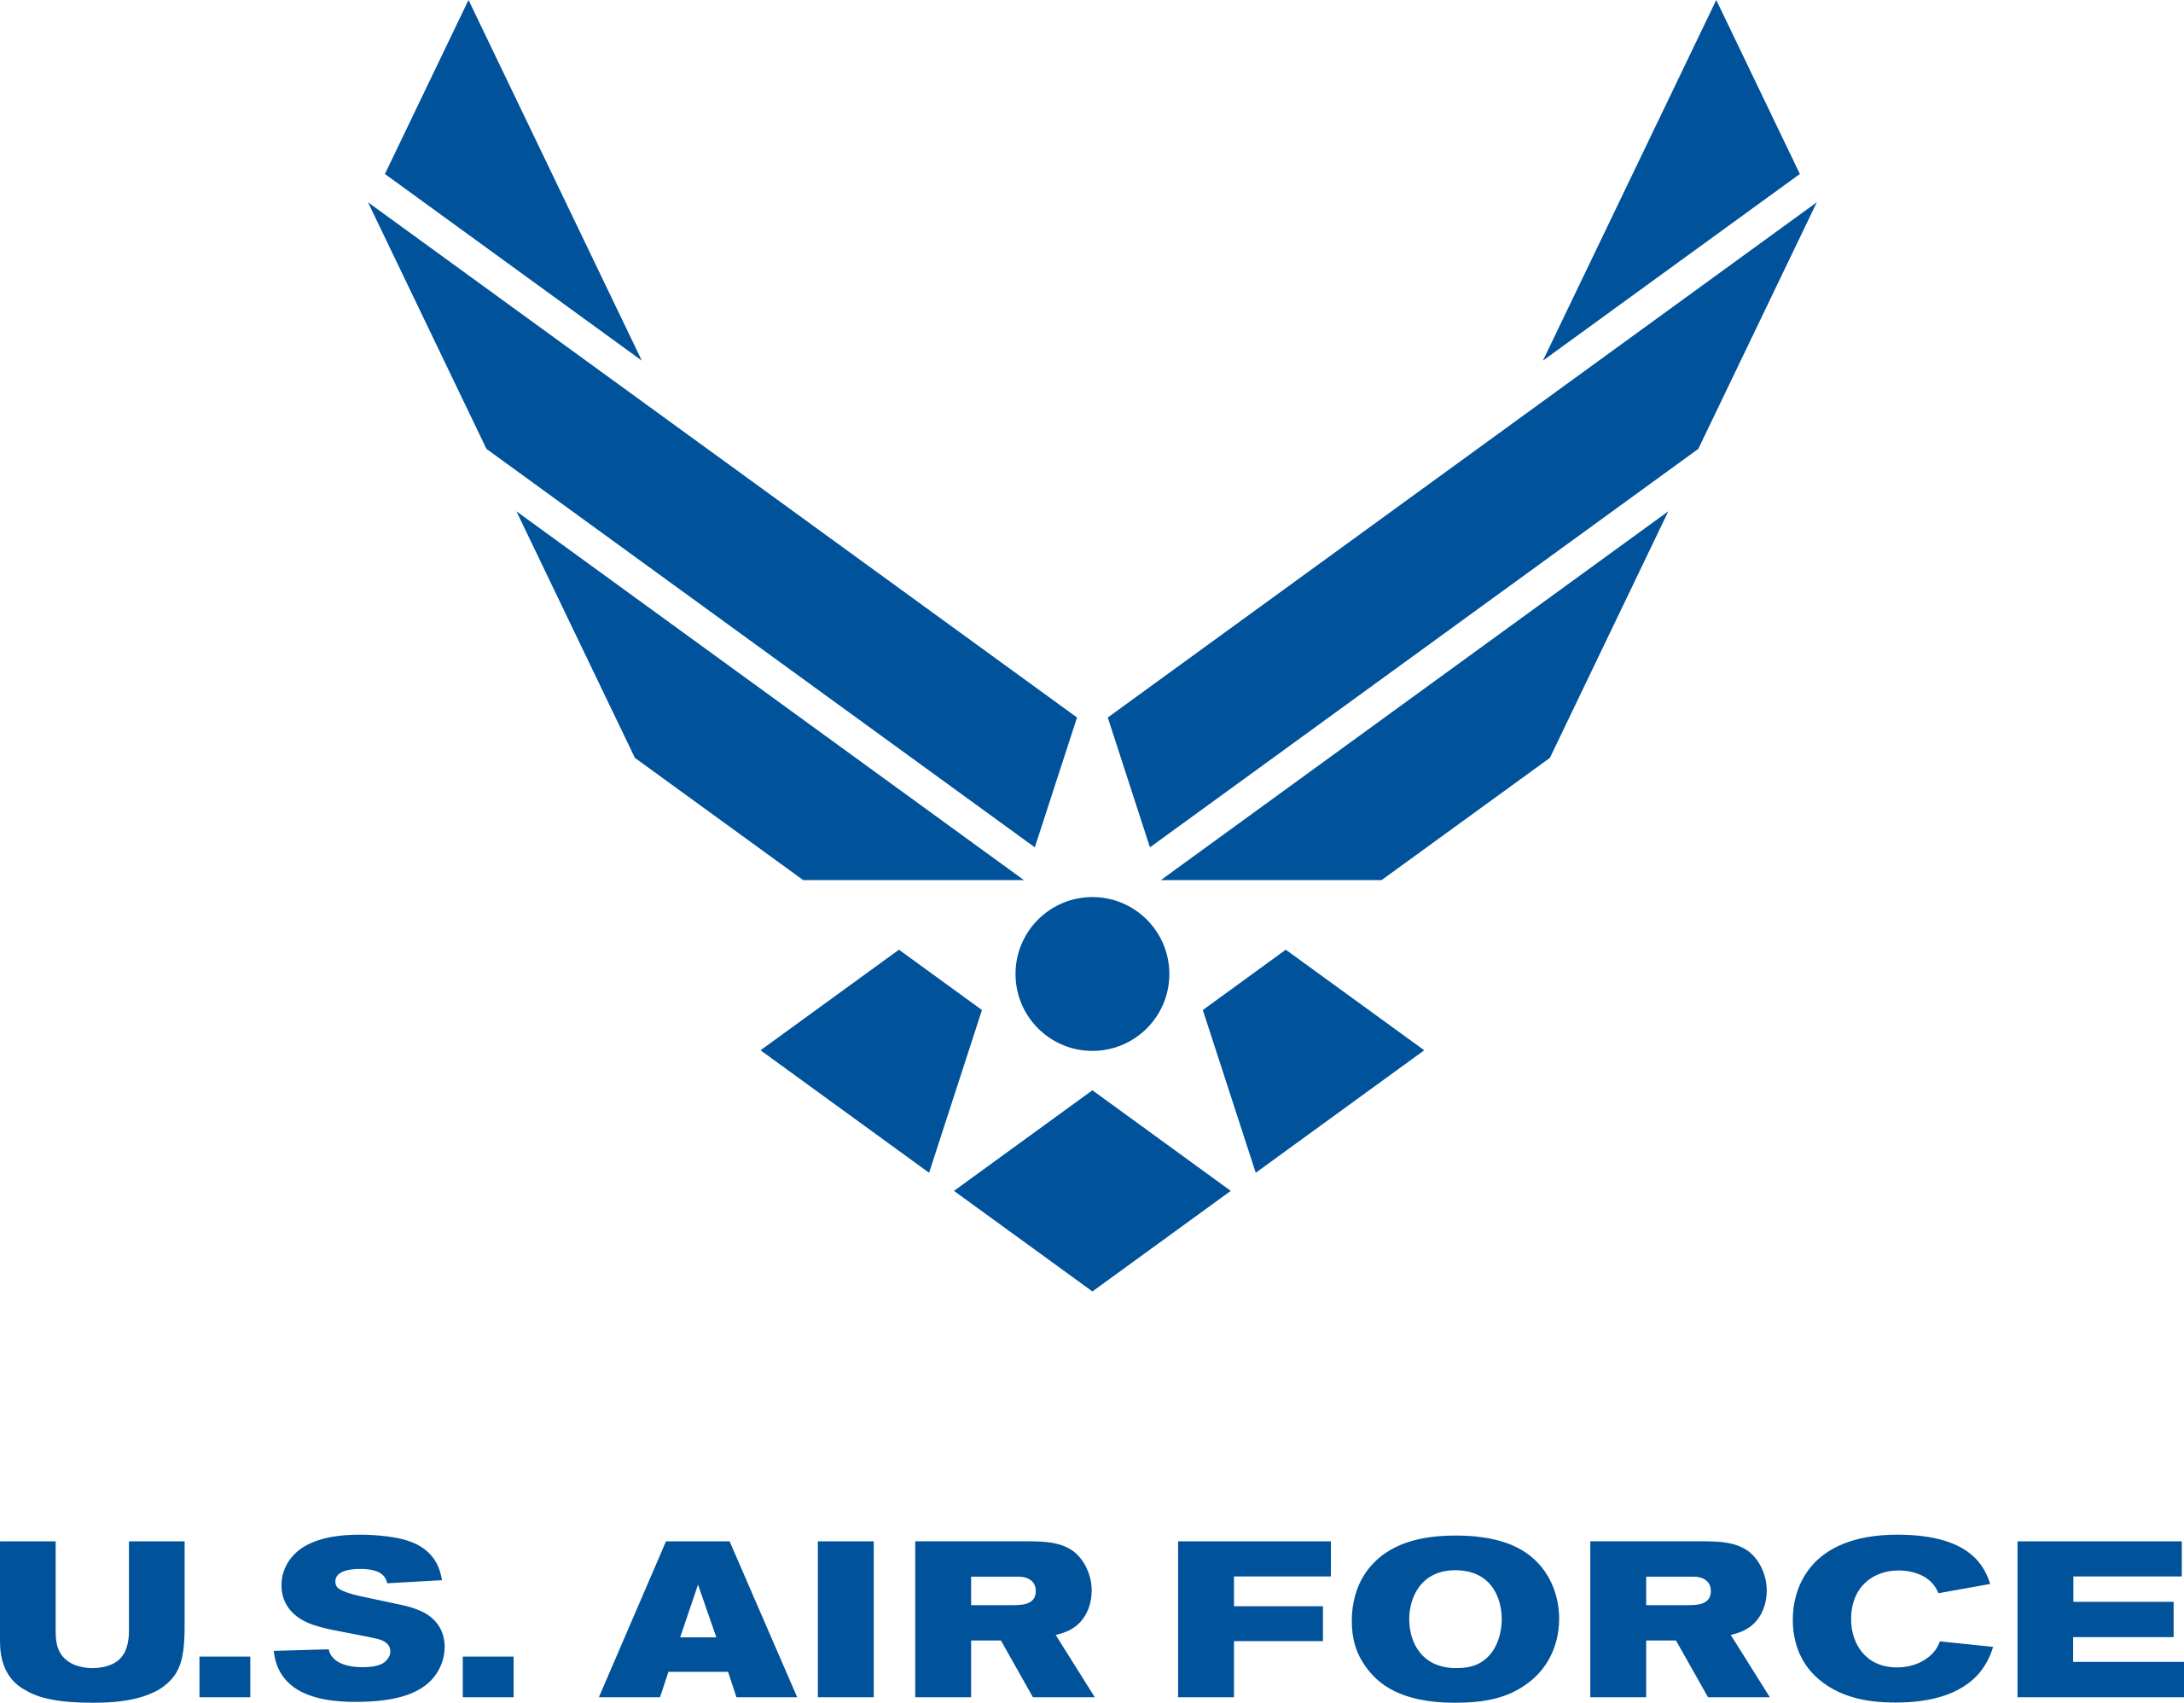 U.S. Department of the Air Force